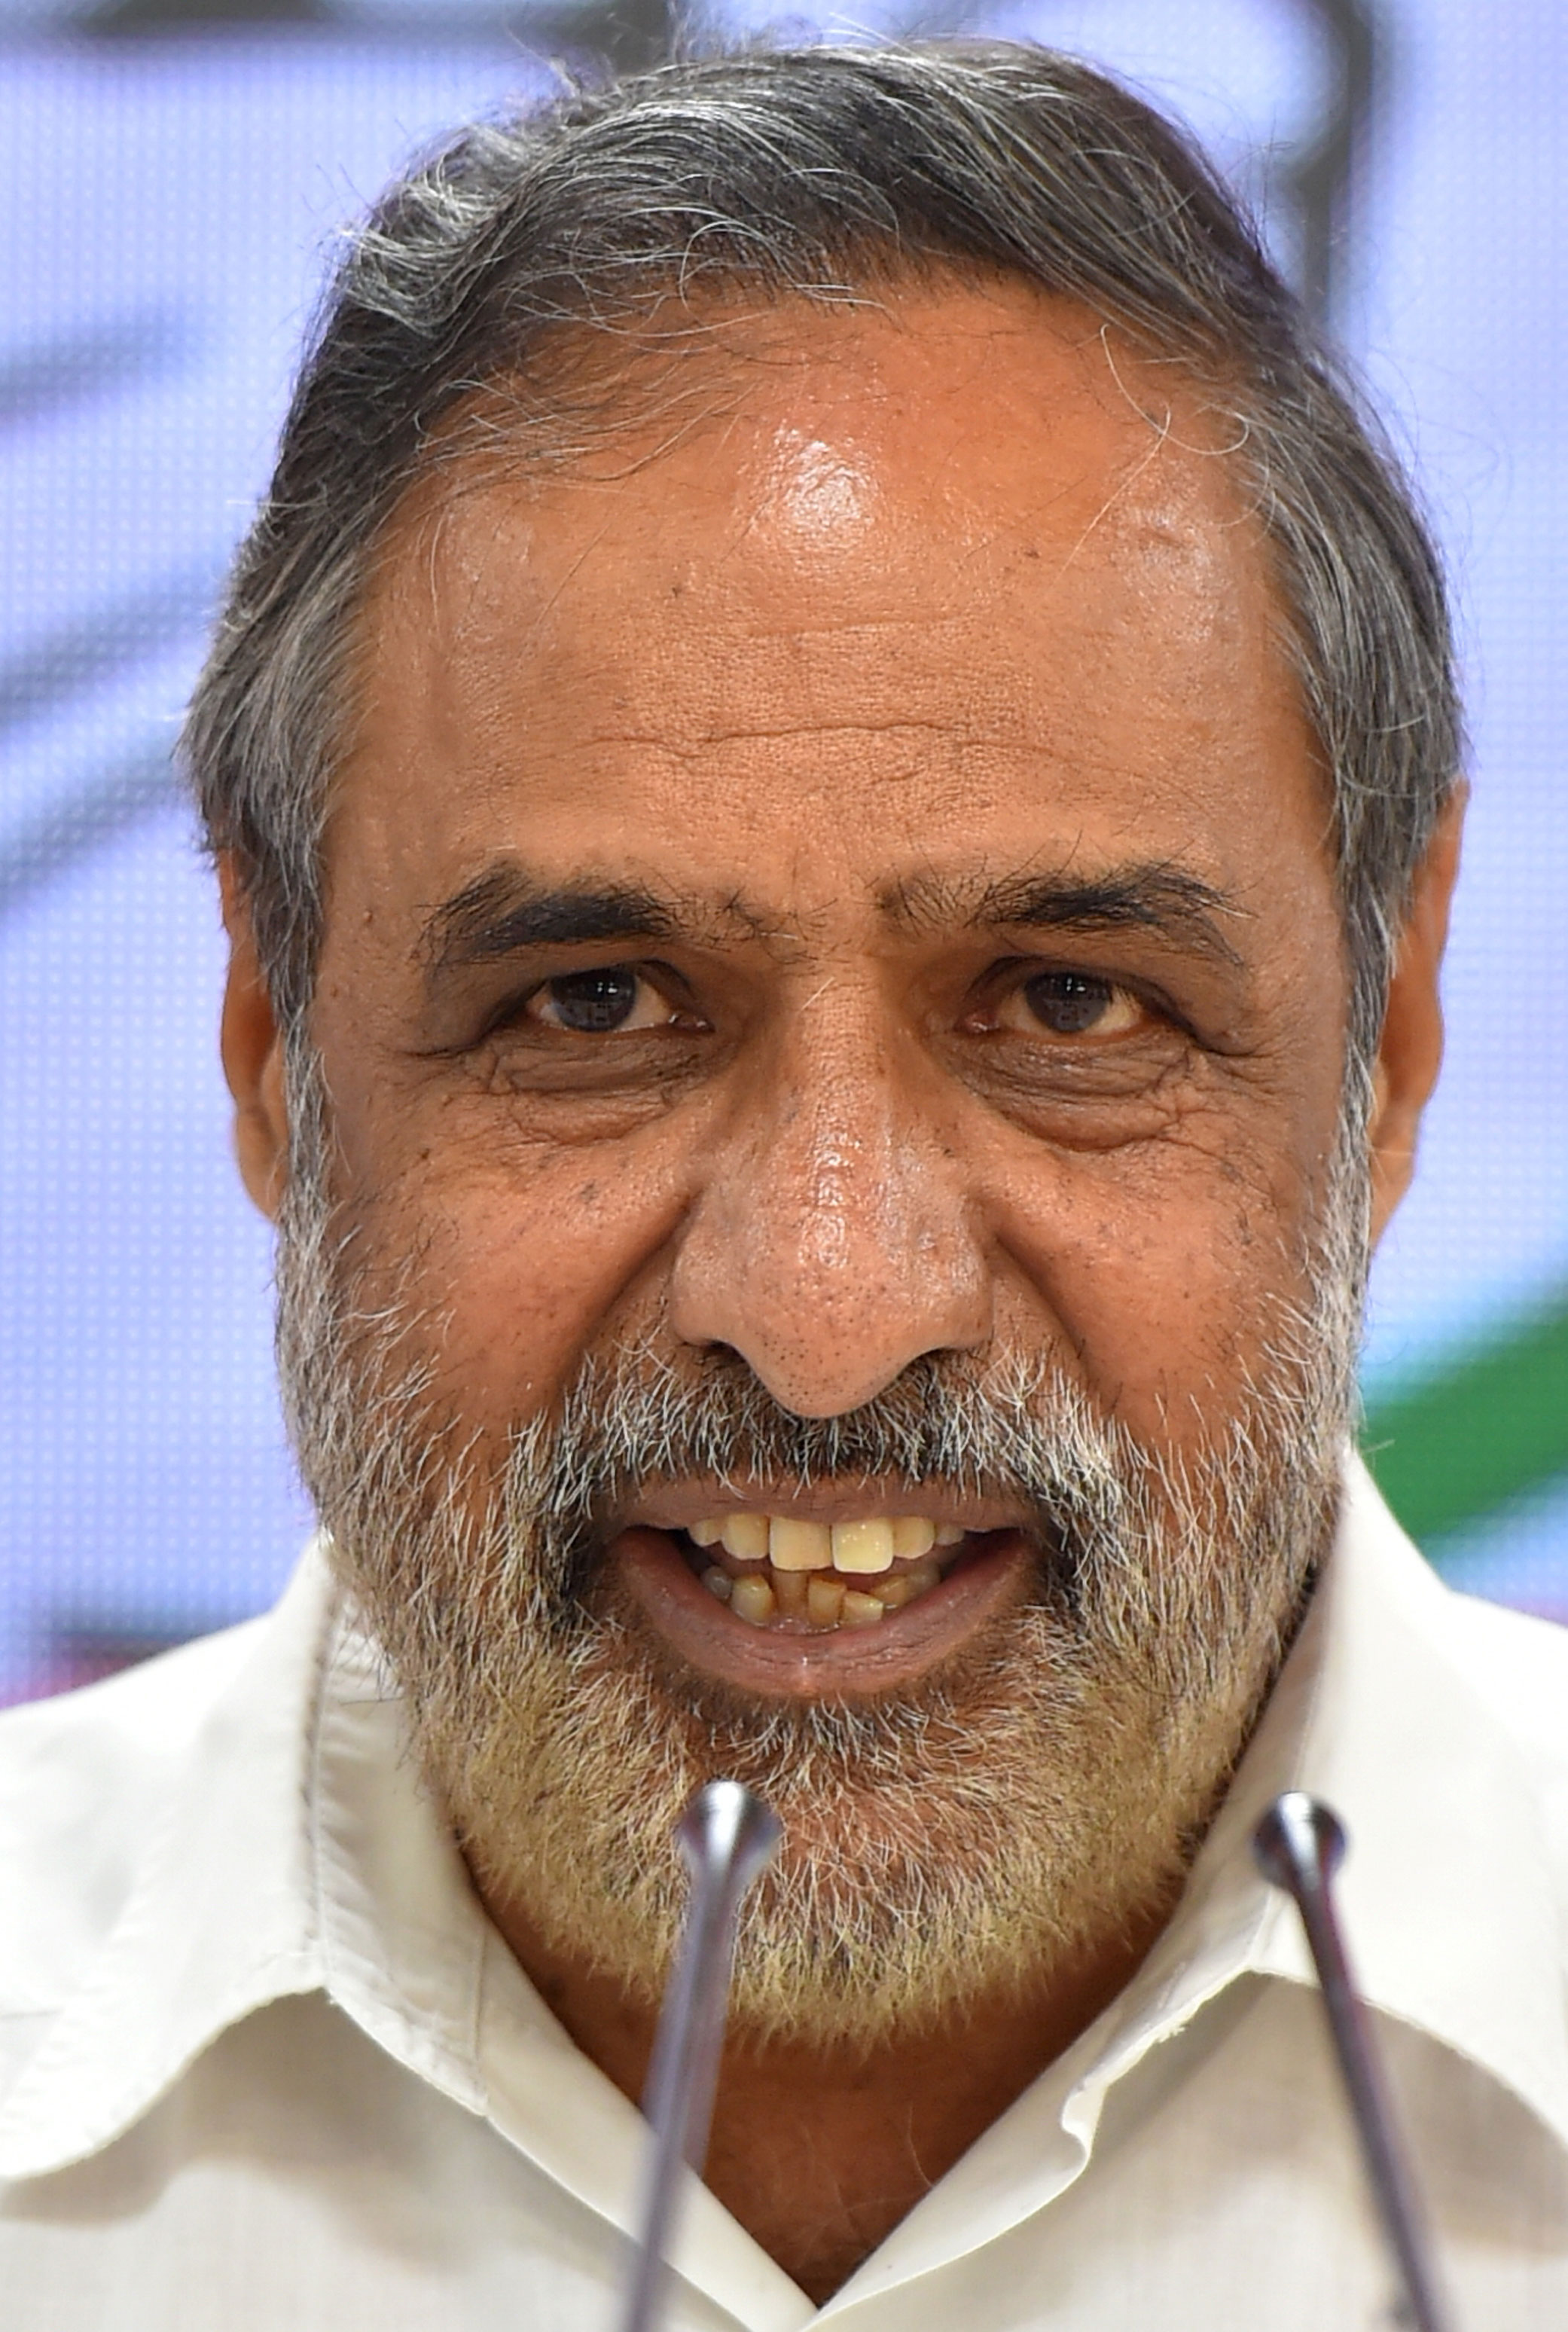 “There has been institutional subversion and the institutions which are tasked with upholding constitutional democracy and delivery of justice, to protect the basic rights of the citizens, have been weakened,” Congress spokesperson Anand Sharma said at a news conference. 
